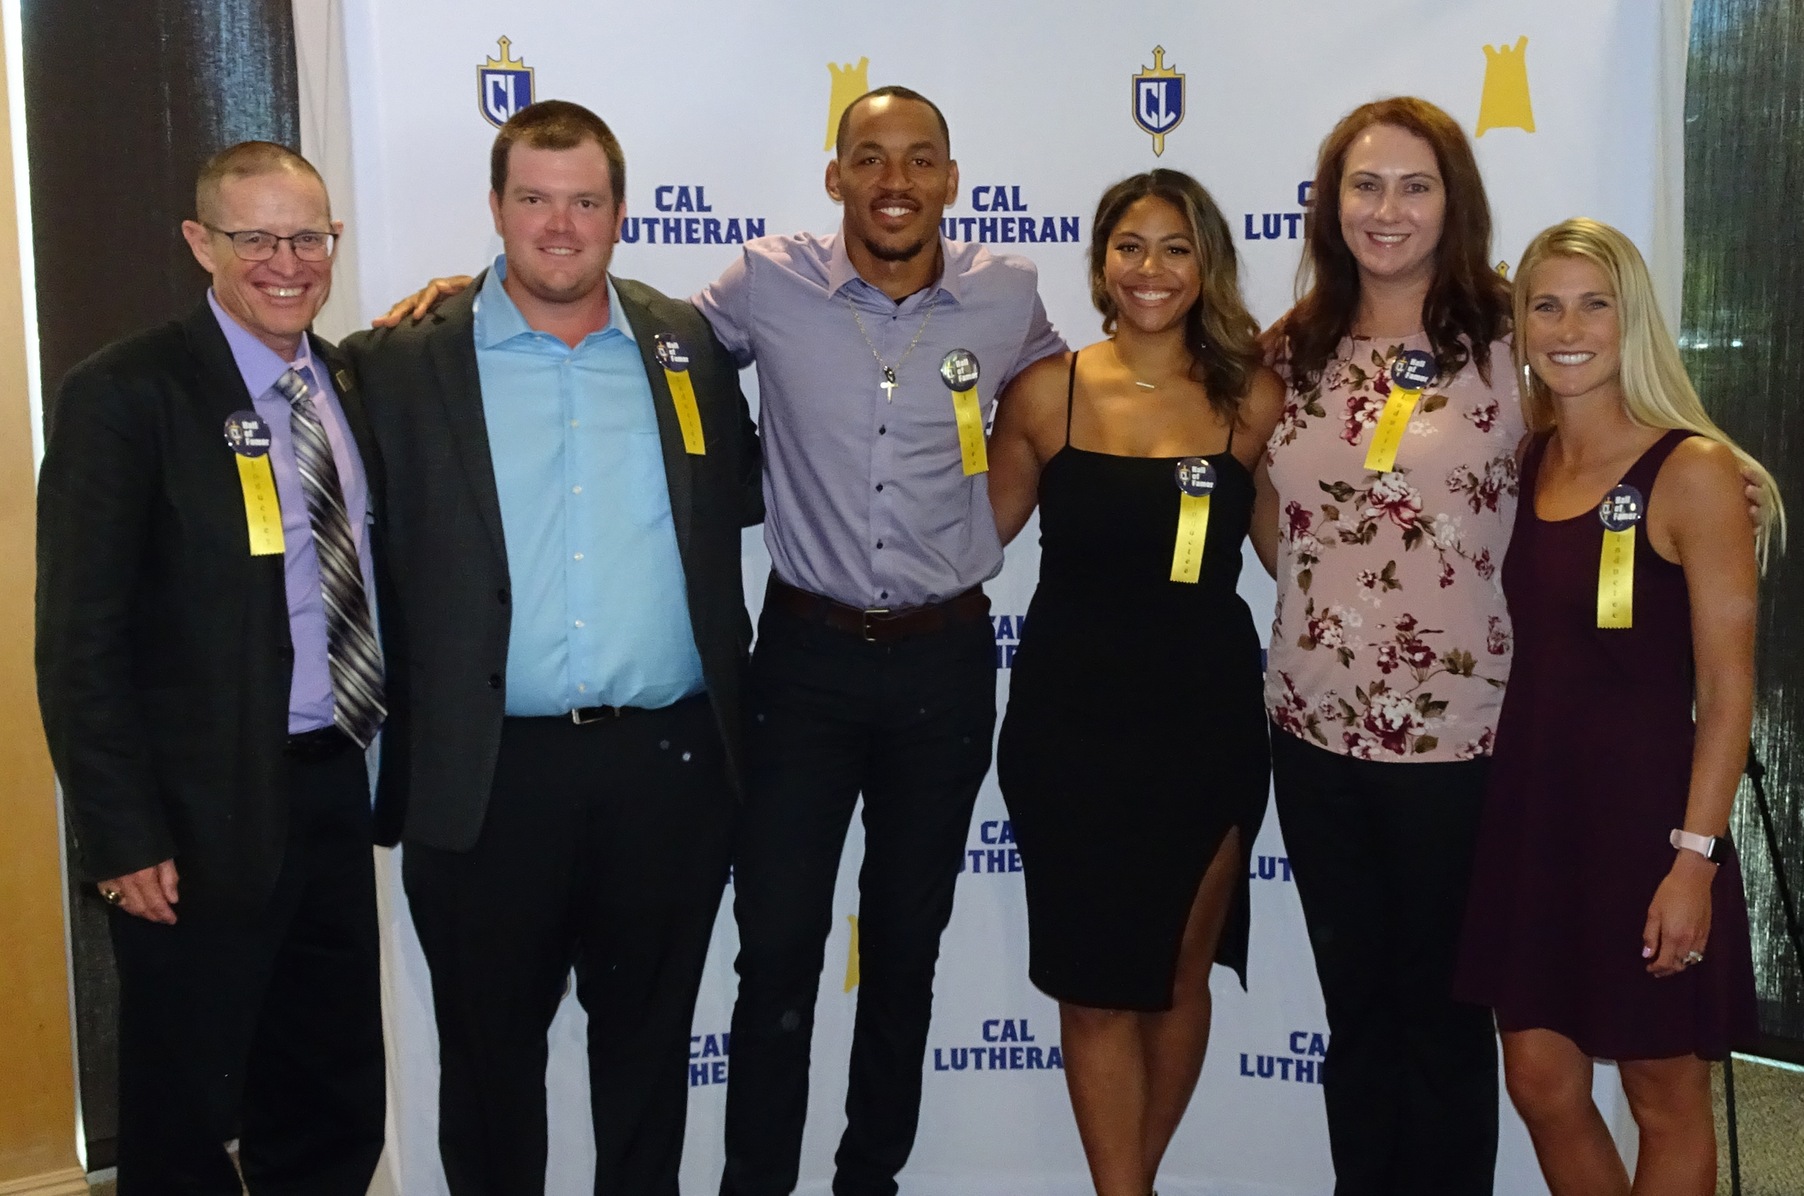 The 2019 Alumni Association Hall of Fame Class, from left to right, Steve Blum, Mikey McGinn, Eric Rogers, Kylie McLogan, Lauren (Stroot) Reynolds, and Jackie (Russell) Griffin.